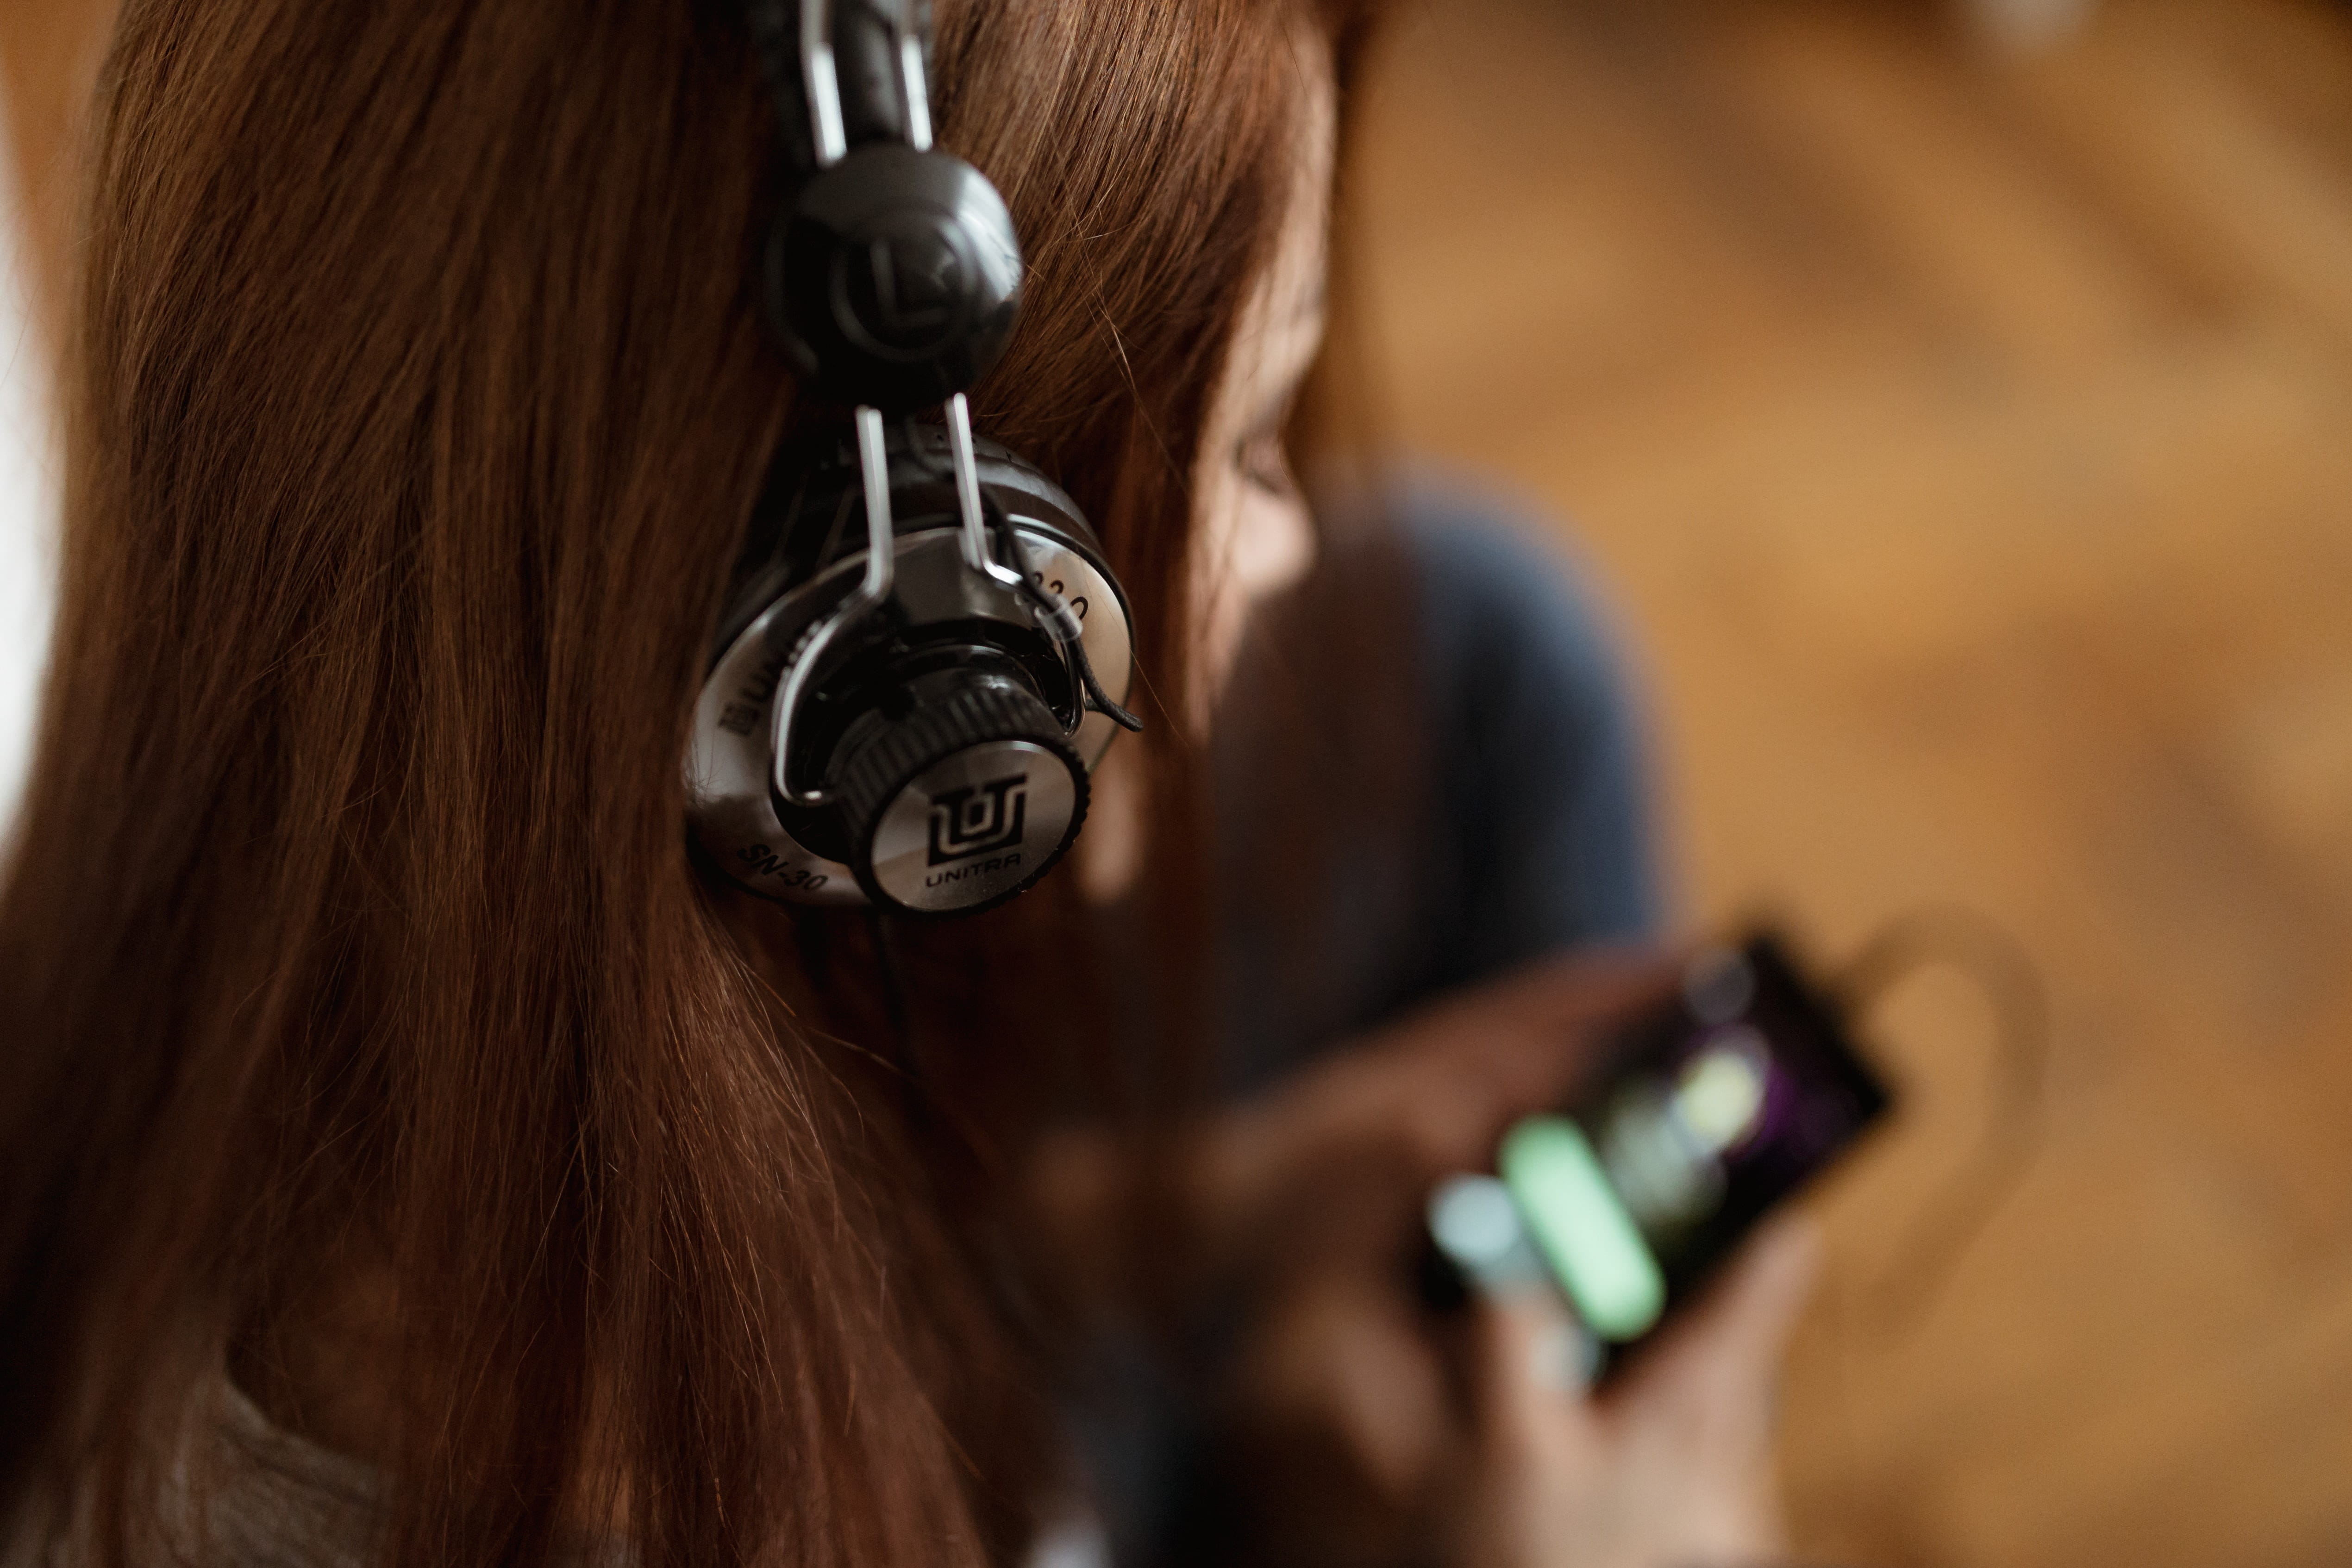 Beautiful young woman in headphones listening to music, adult